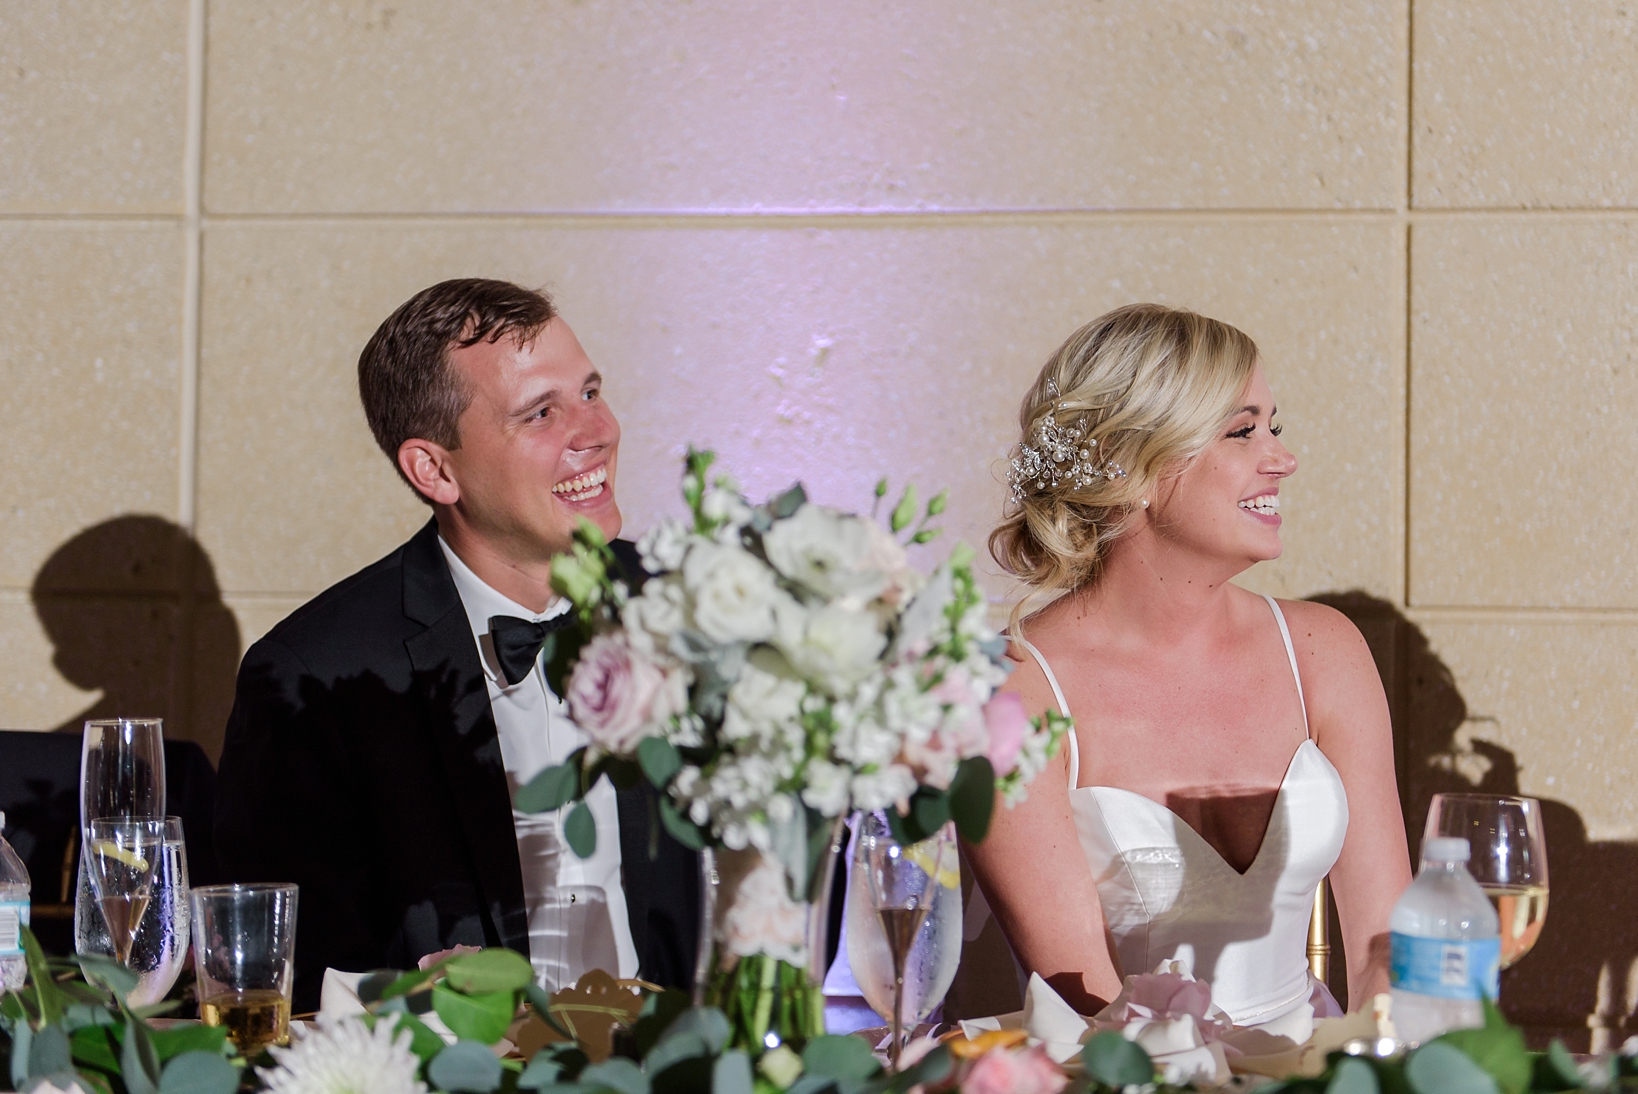 During speeches, the newlyweds laugh at the stories being told.